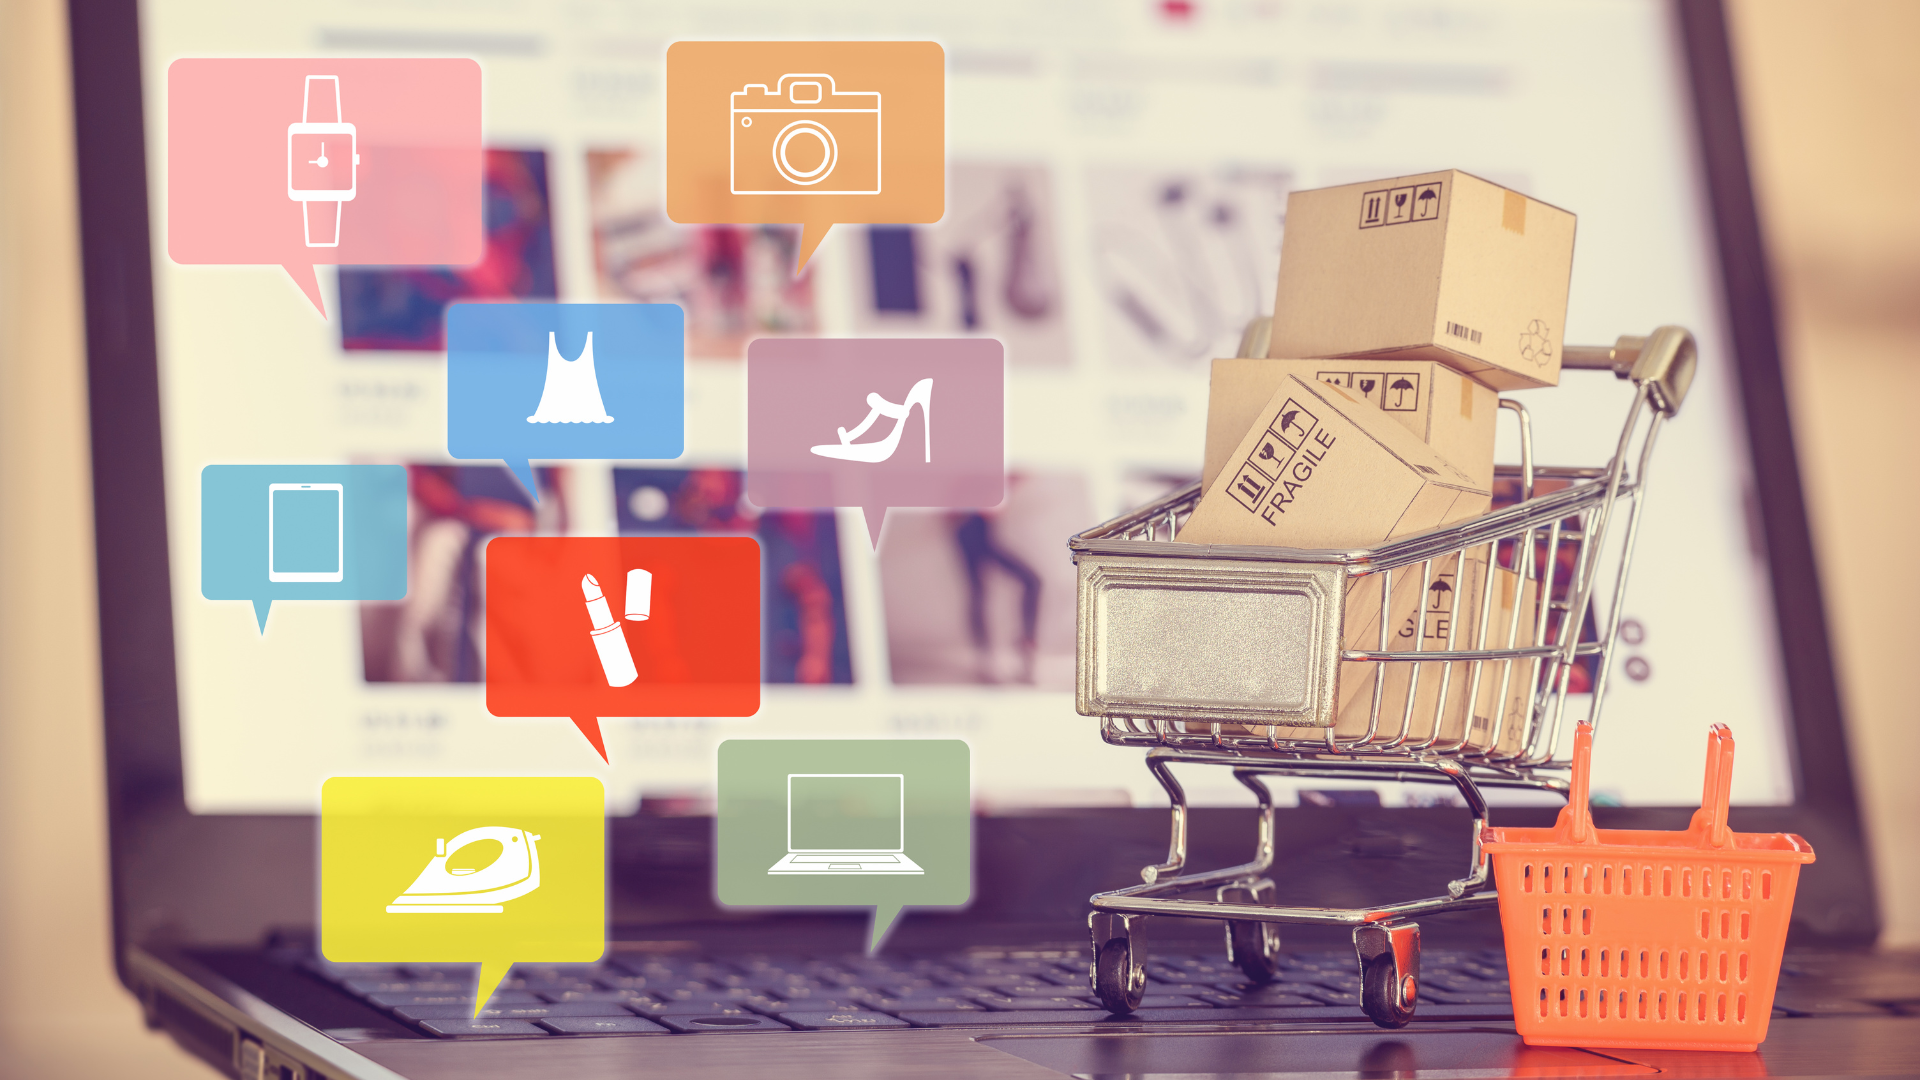 6 Updates You can Make to Your eCommerce PDPs Right Now